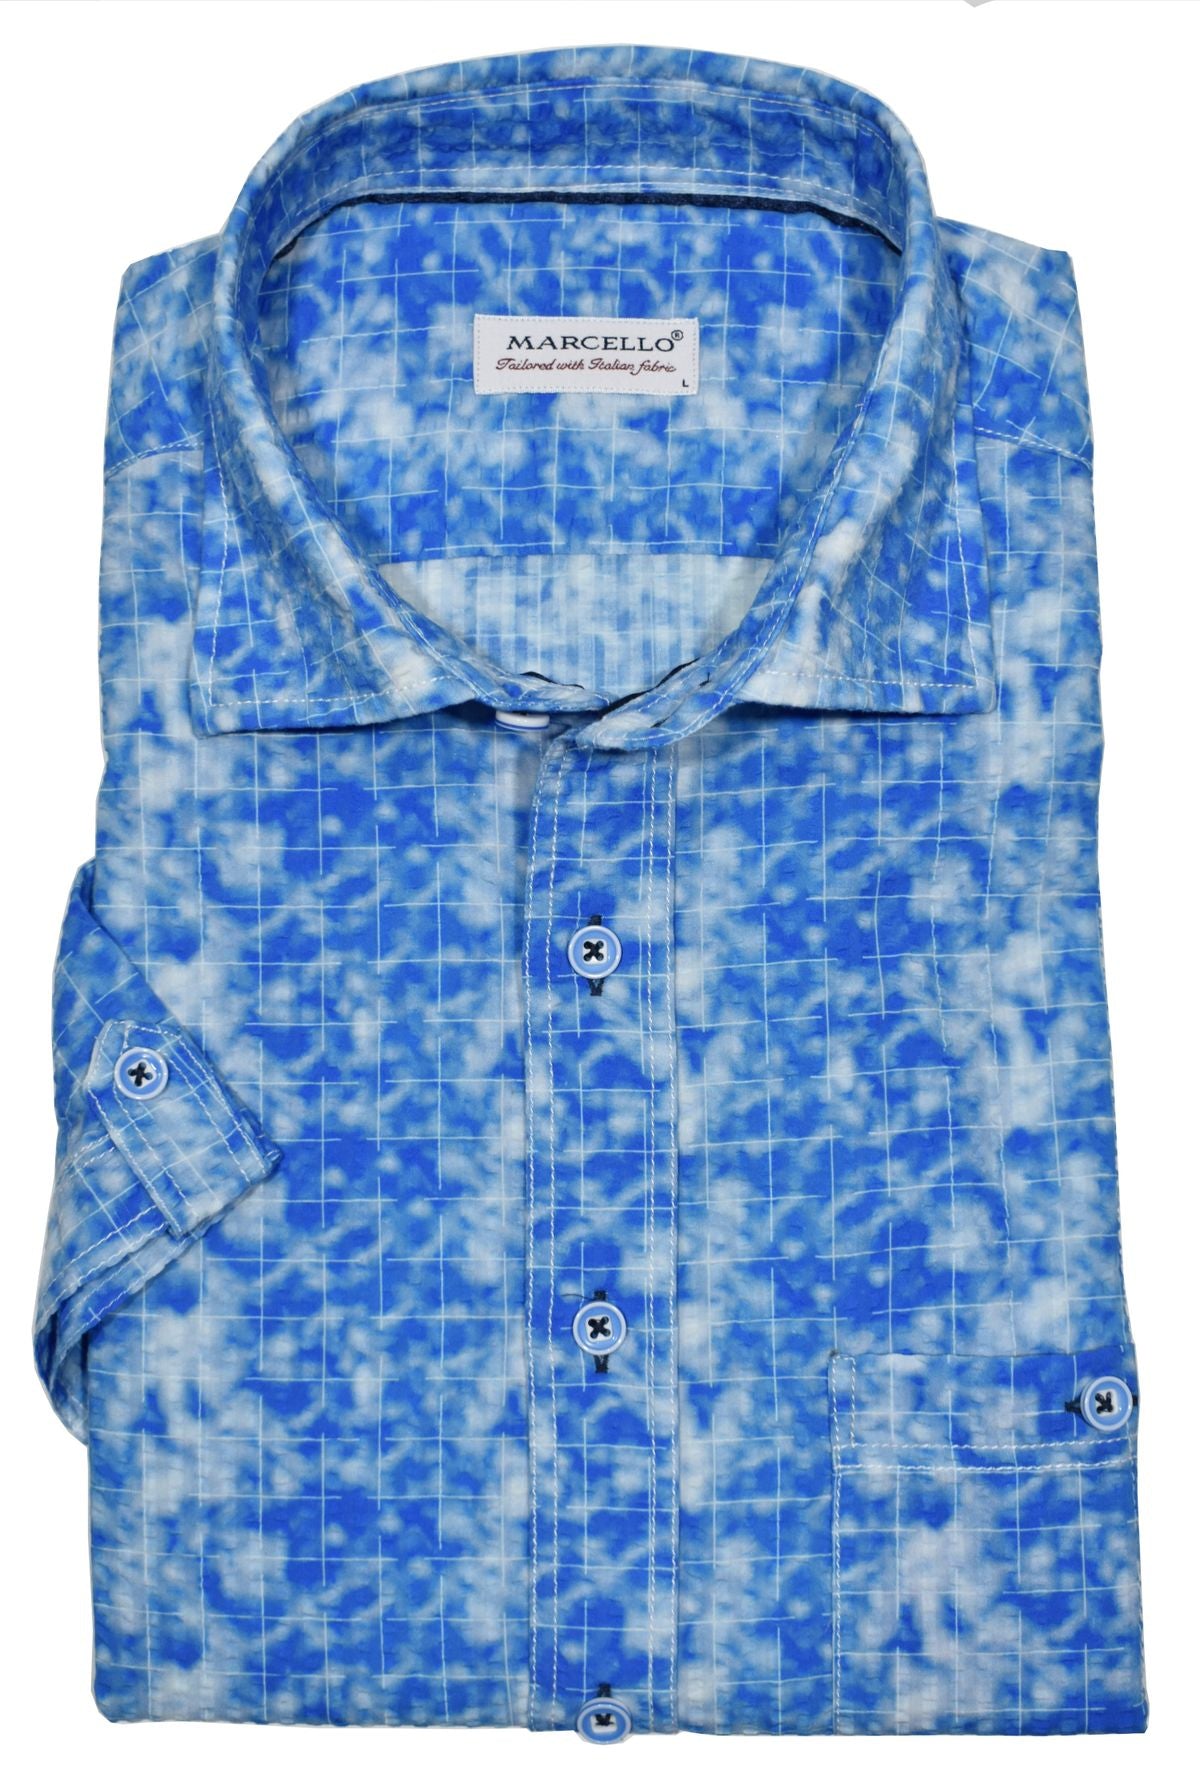 Stay cool and stylish in the W822S Royal Seersucker shirt. Made from lightweight, seersucker fabric, this short-sleeved model comes in a royal blue hue with shades of white and a white windowpane pattern. Tonal white stitching and a classic chest pocket provide the perfect trendy touch, while custom-matched buttons keep you looking sharp.